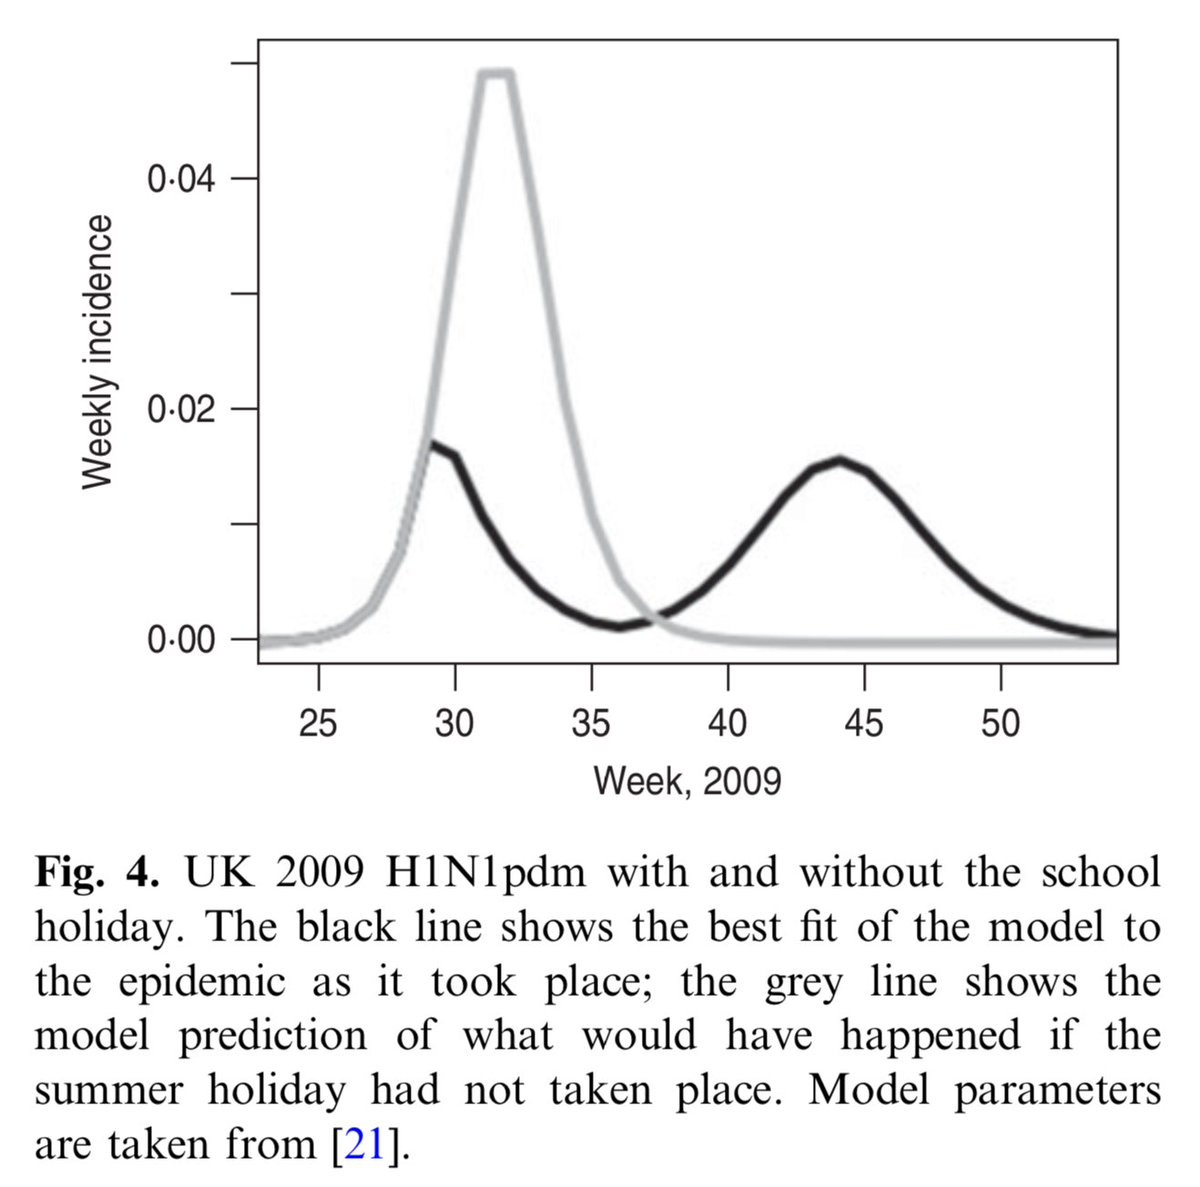 As a tangible example of behaviour change reducing overshoot, take the 2009 flu pandemic in UK, where school summer holidays interrupted transmission. Had this not happened, it's been estimated epidemic would've infected 20% more people than it did:  https://www.cambridge.org/core/journals/epidemiology-and-infection/article/influence-of-school-holiday-timing-on-epidemic-impact/5F0E4508895BB1A1B33DF9BA31FD7277 8/